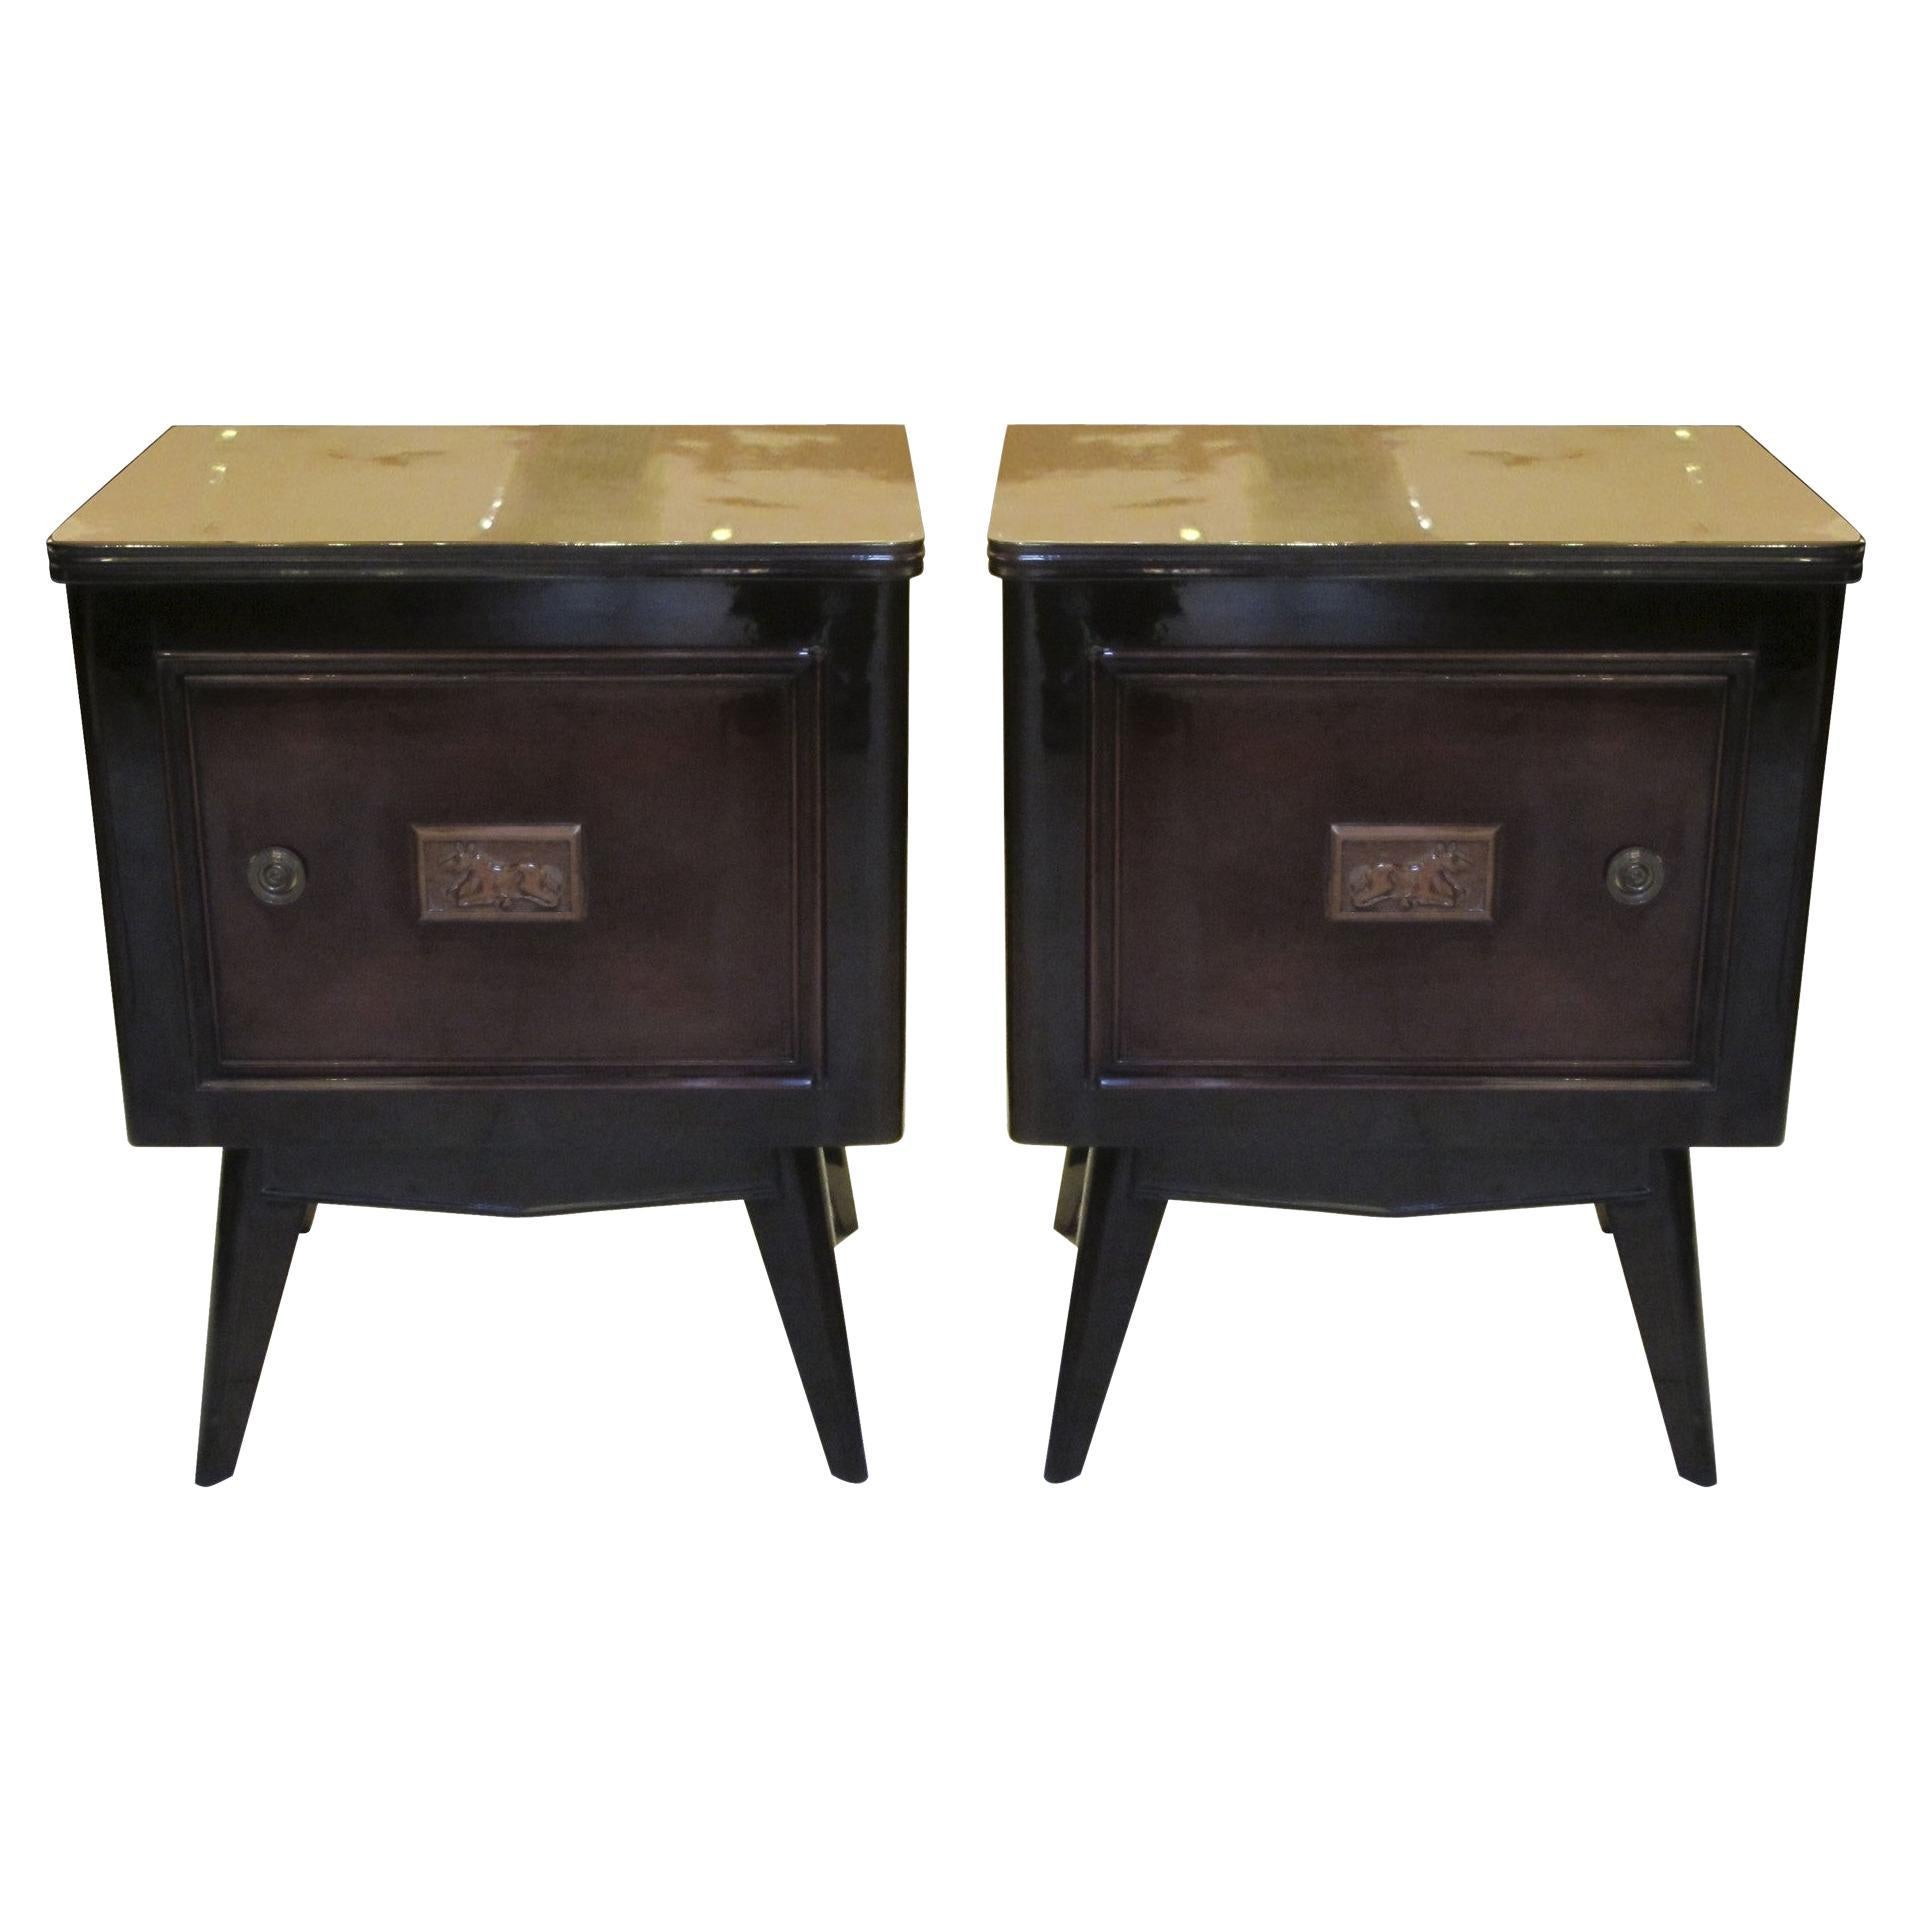 Pair of bedside tables with dog carved on its front , 1950, American